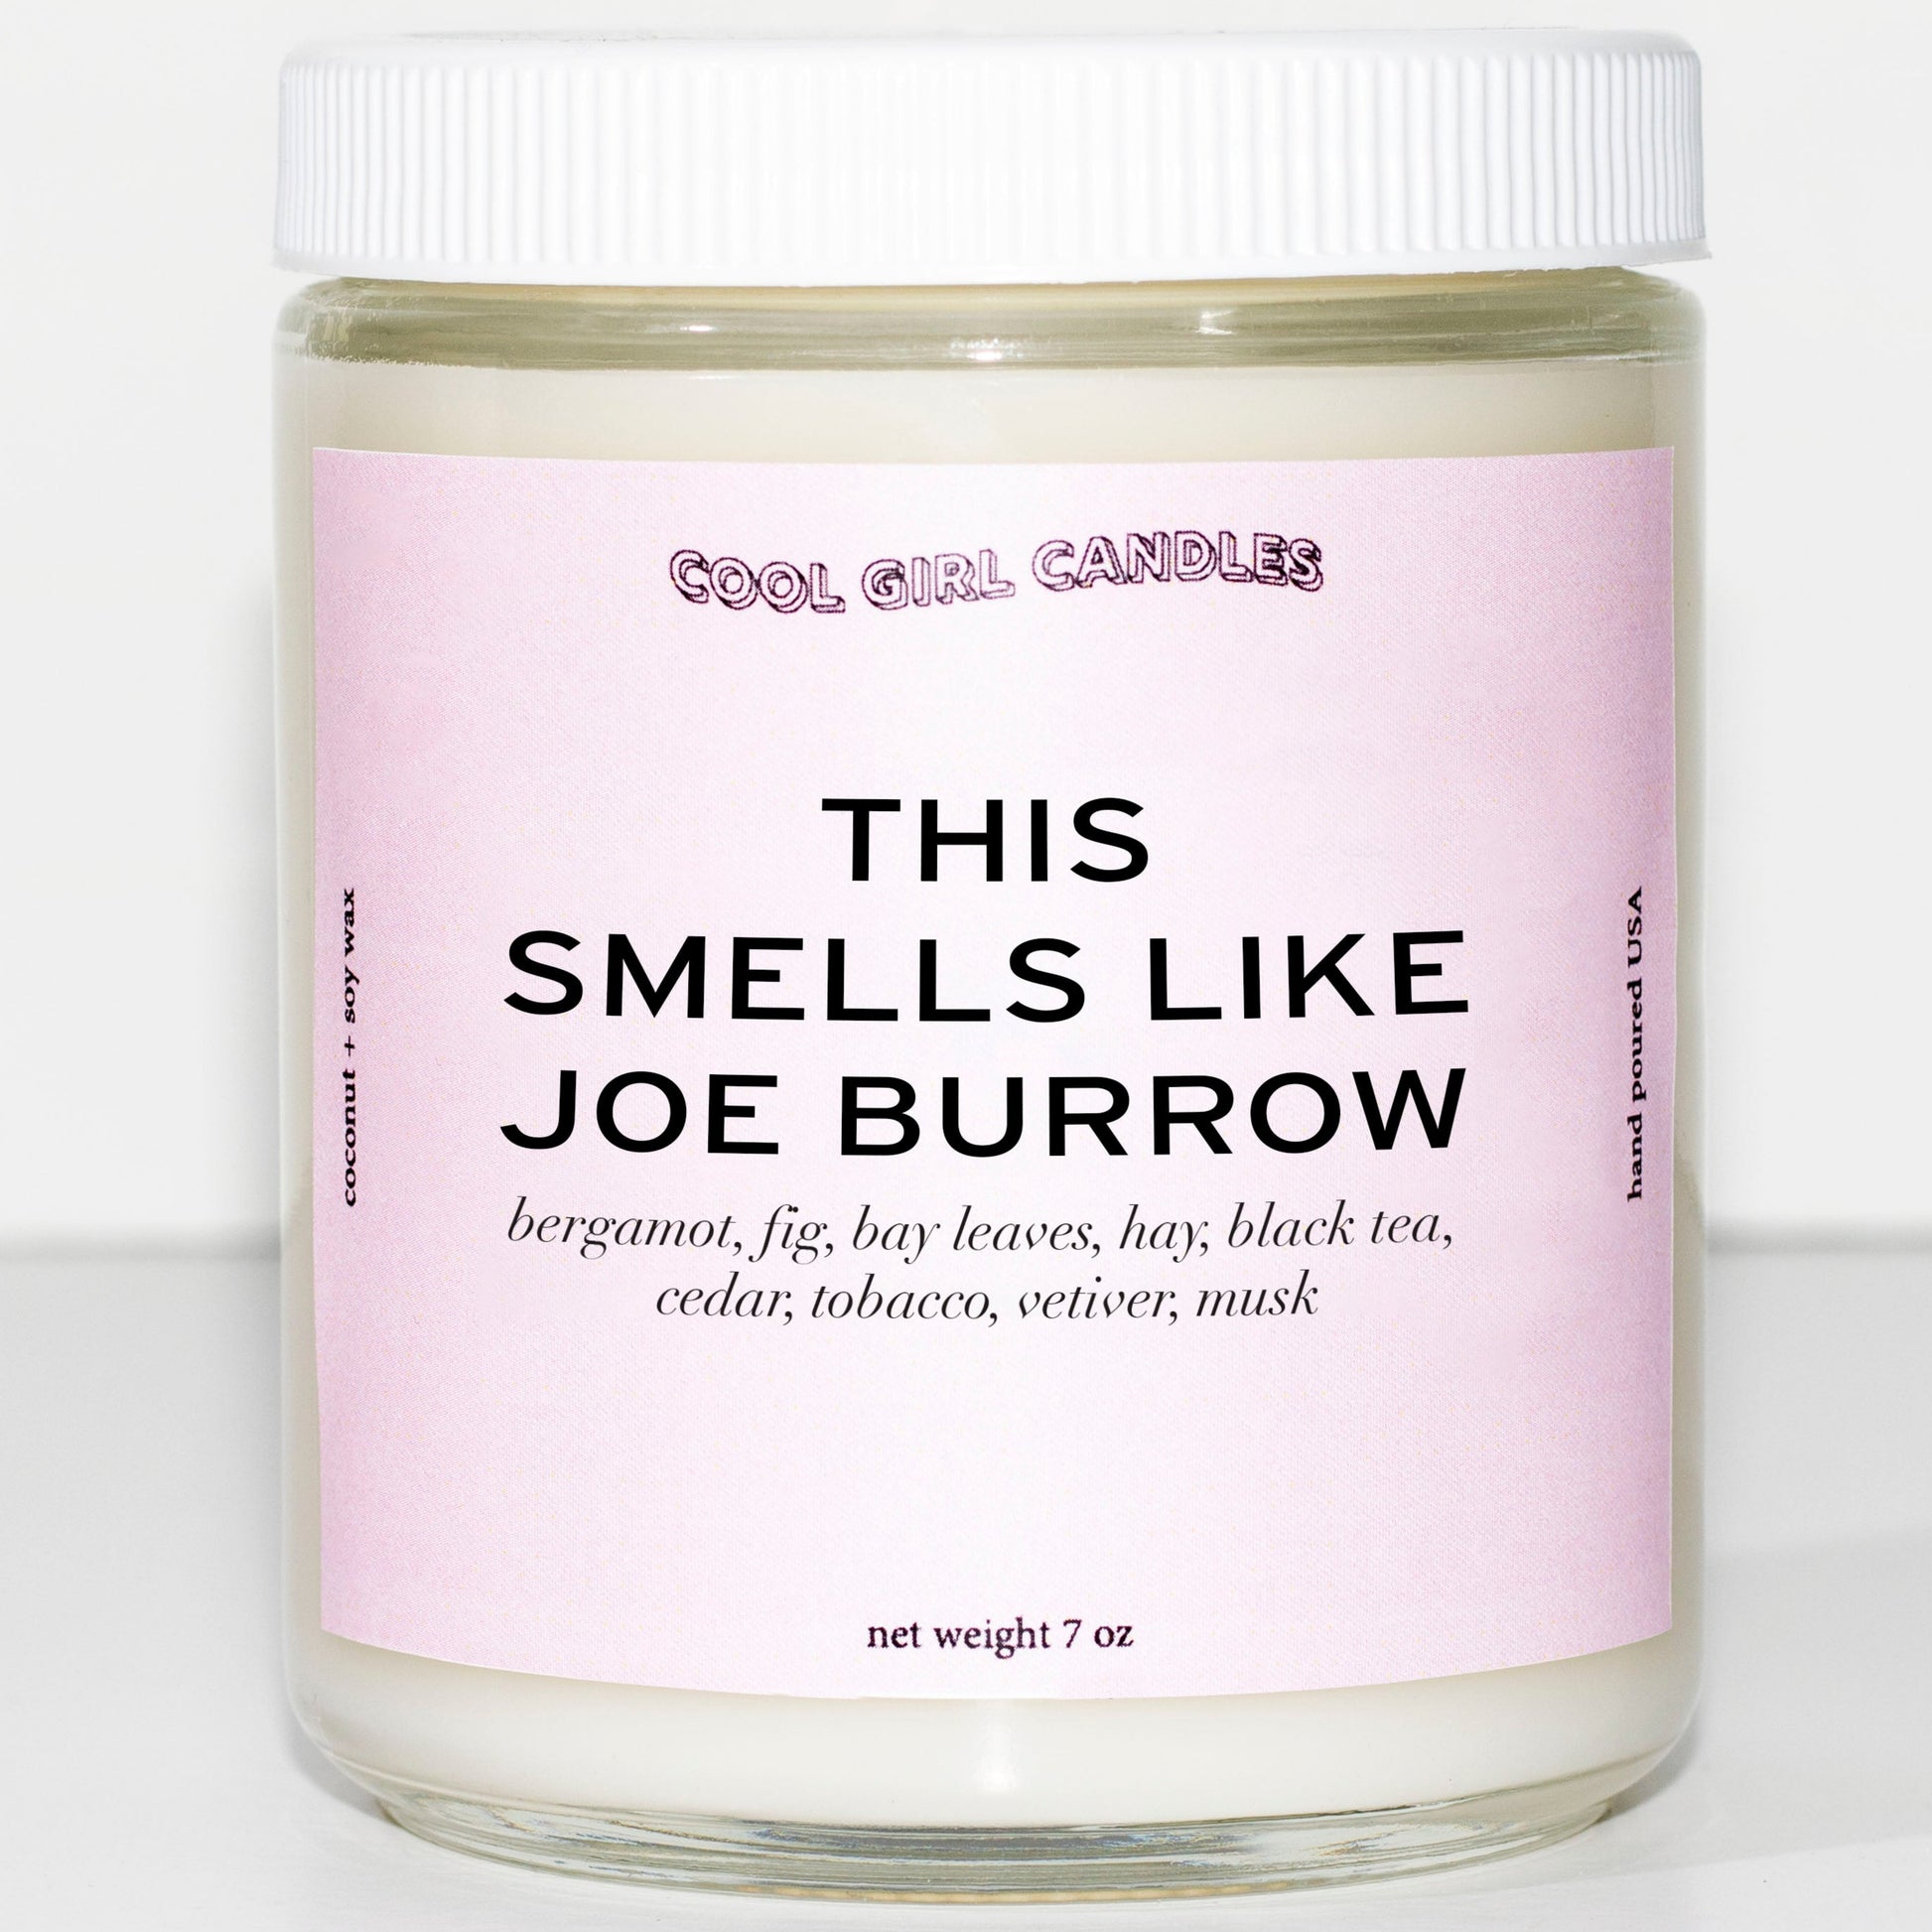 A pastel pink candle that says this smells like joe burrow from cool girl candles. A sports gift for anyone who loves joe burrow, the Cincinnati Bengals quarterback football player 